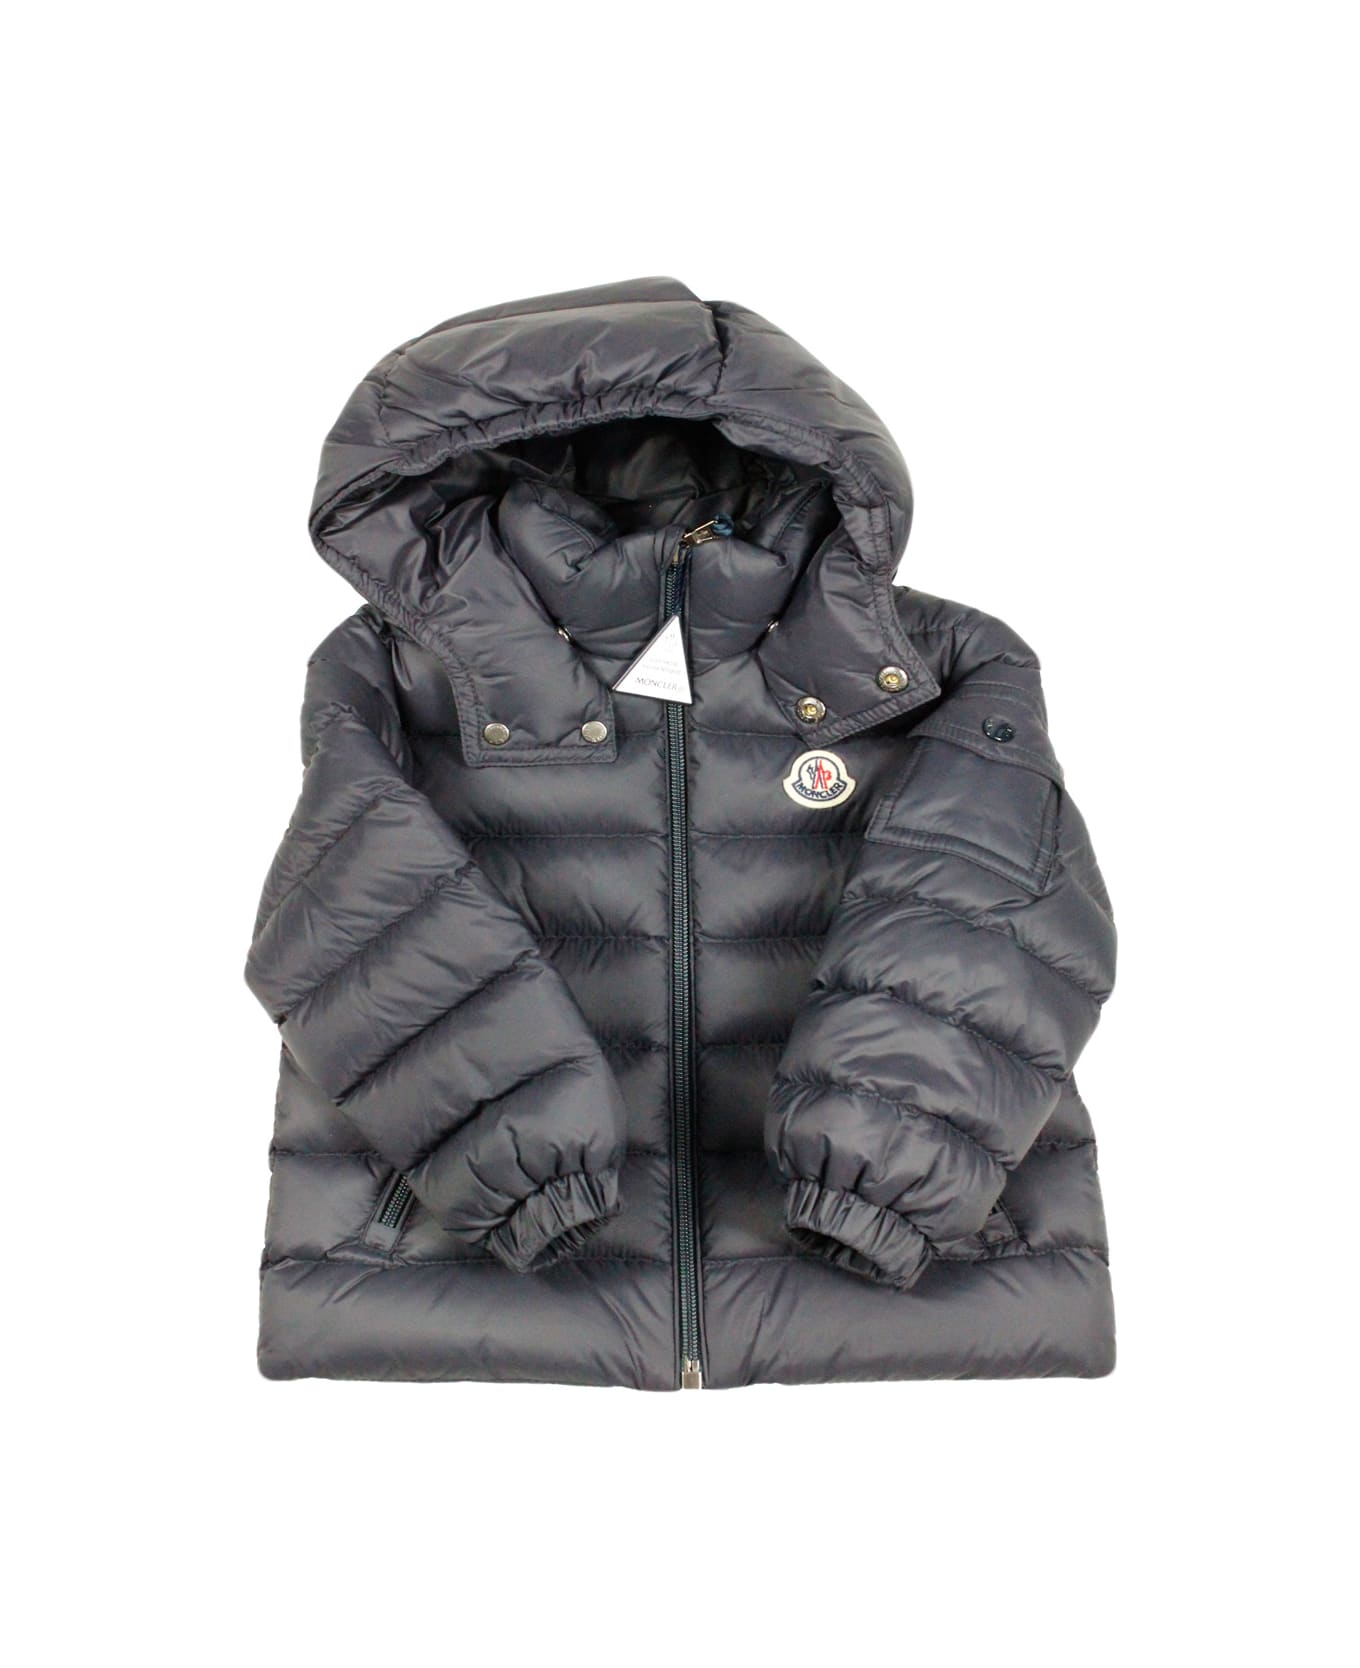 Moncler Jules Down Jacket Filled With Real Goose Down With Detachable Hood And Zip Closure-. - Blu コート＆ジャケット